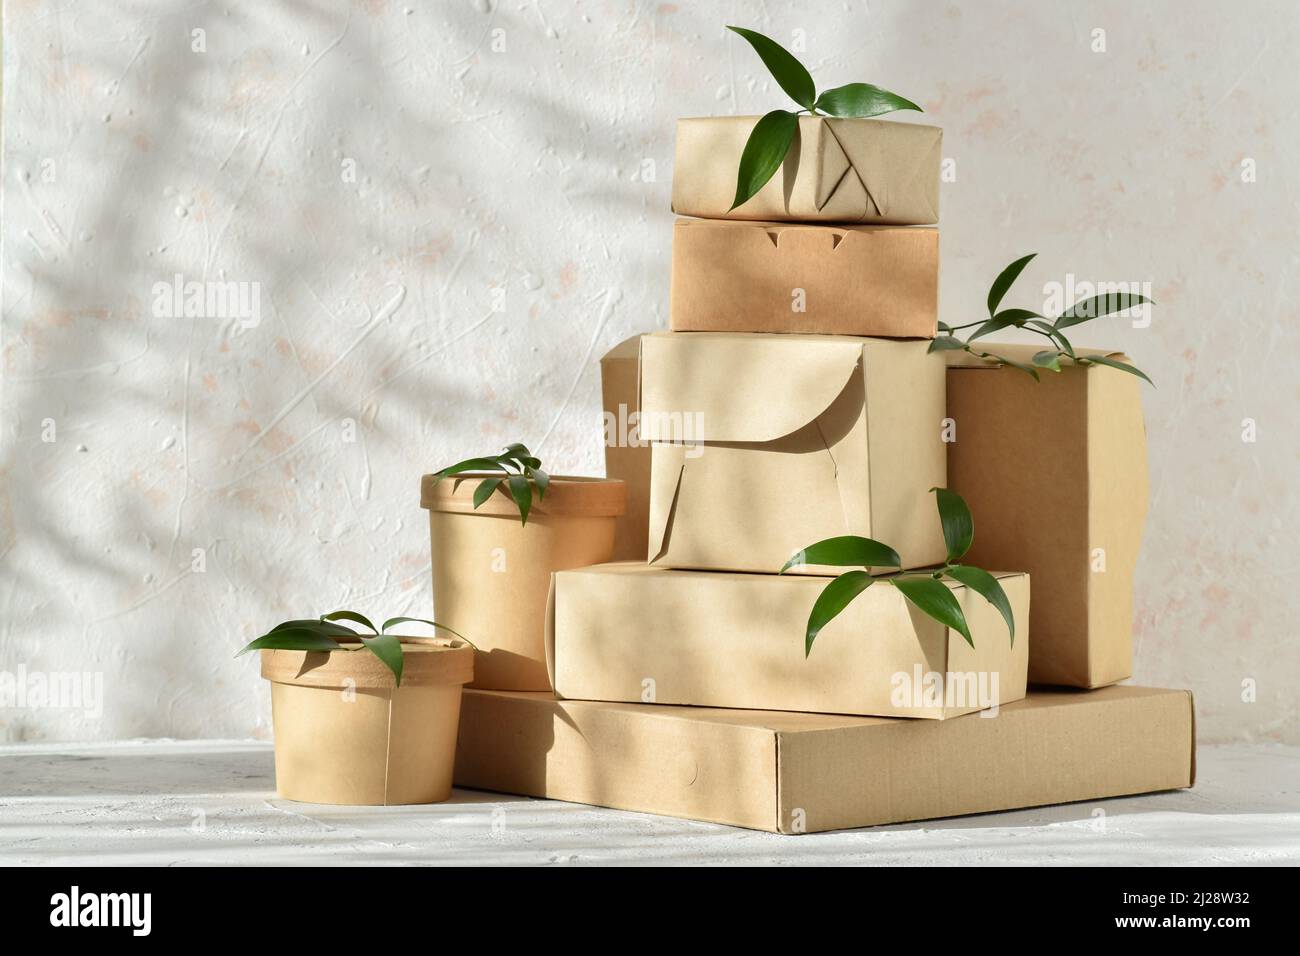 Eco packaging made of paper and cardboard. Takeaway food delivery. Various paper packages with natural light Stock Photo